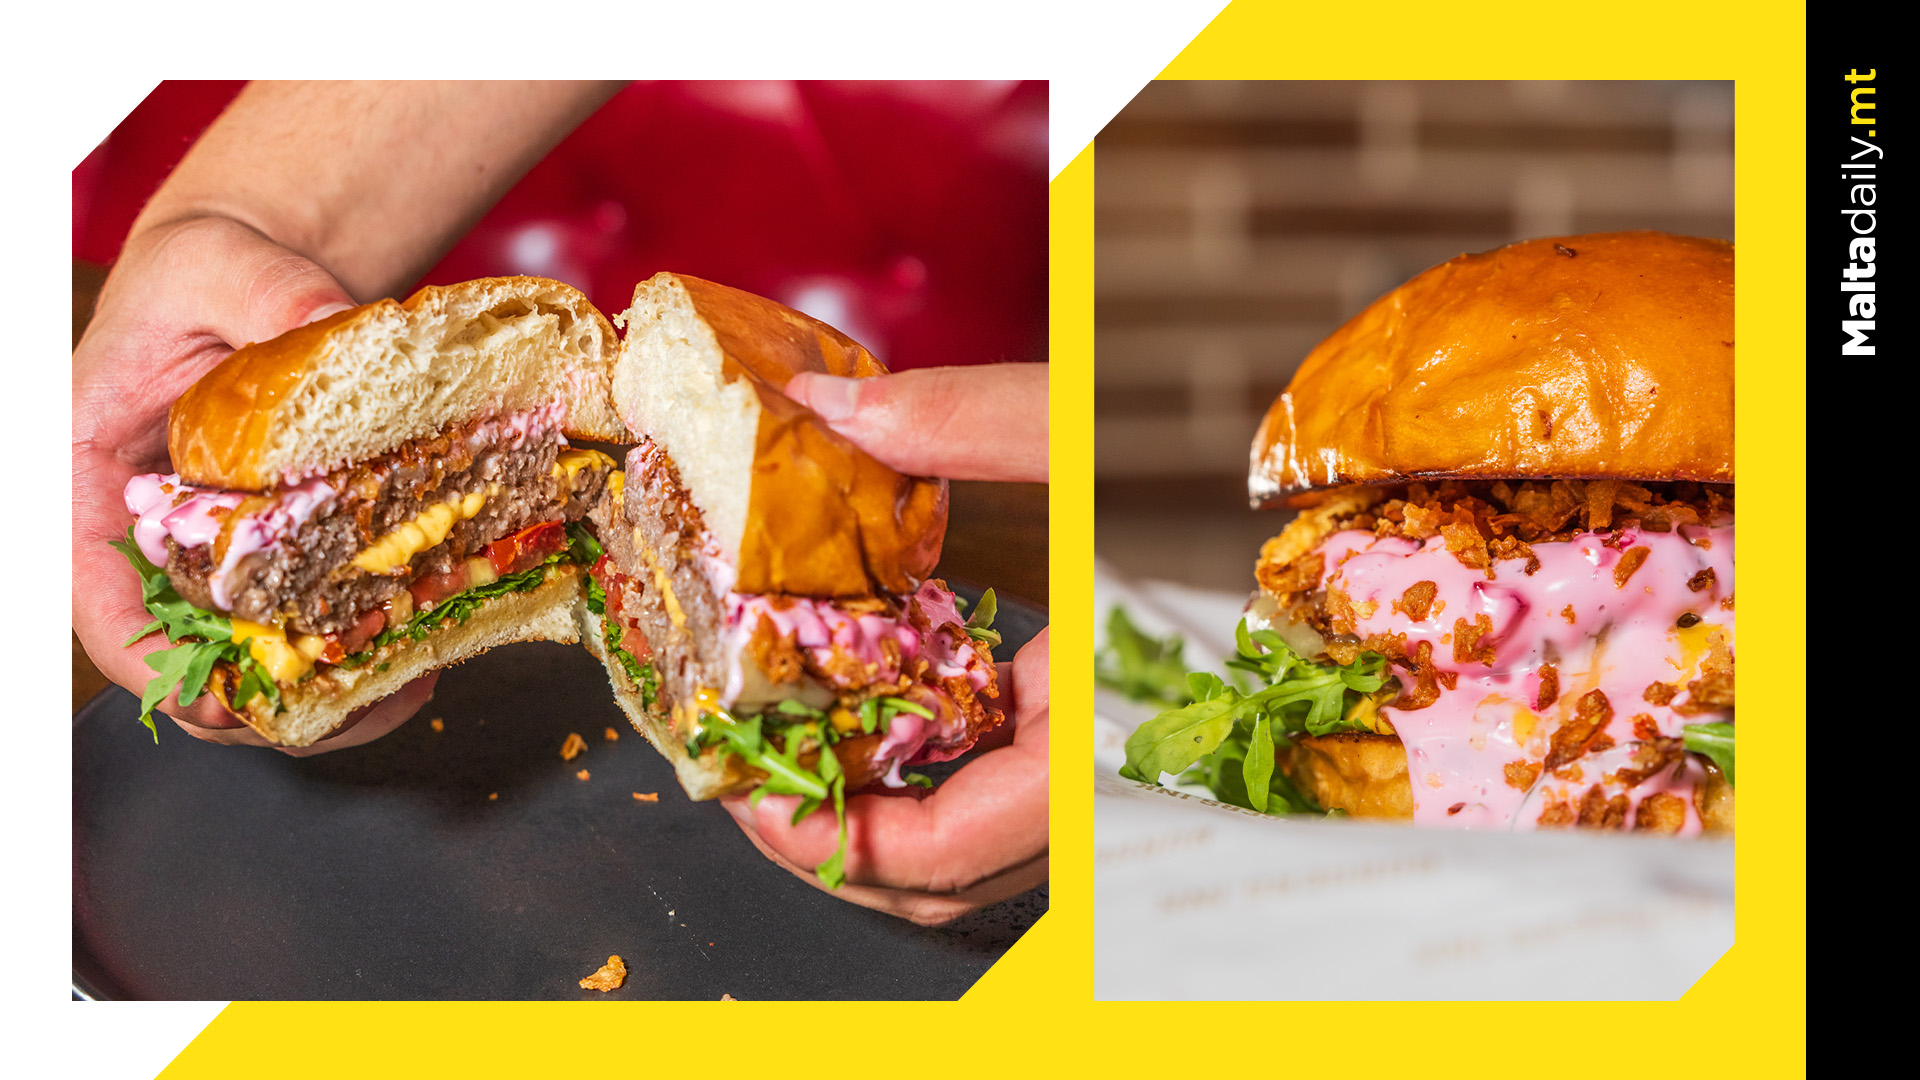 Malta Daily X Burgers.Ink's Pink October Burger is Supporting A Good Cause